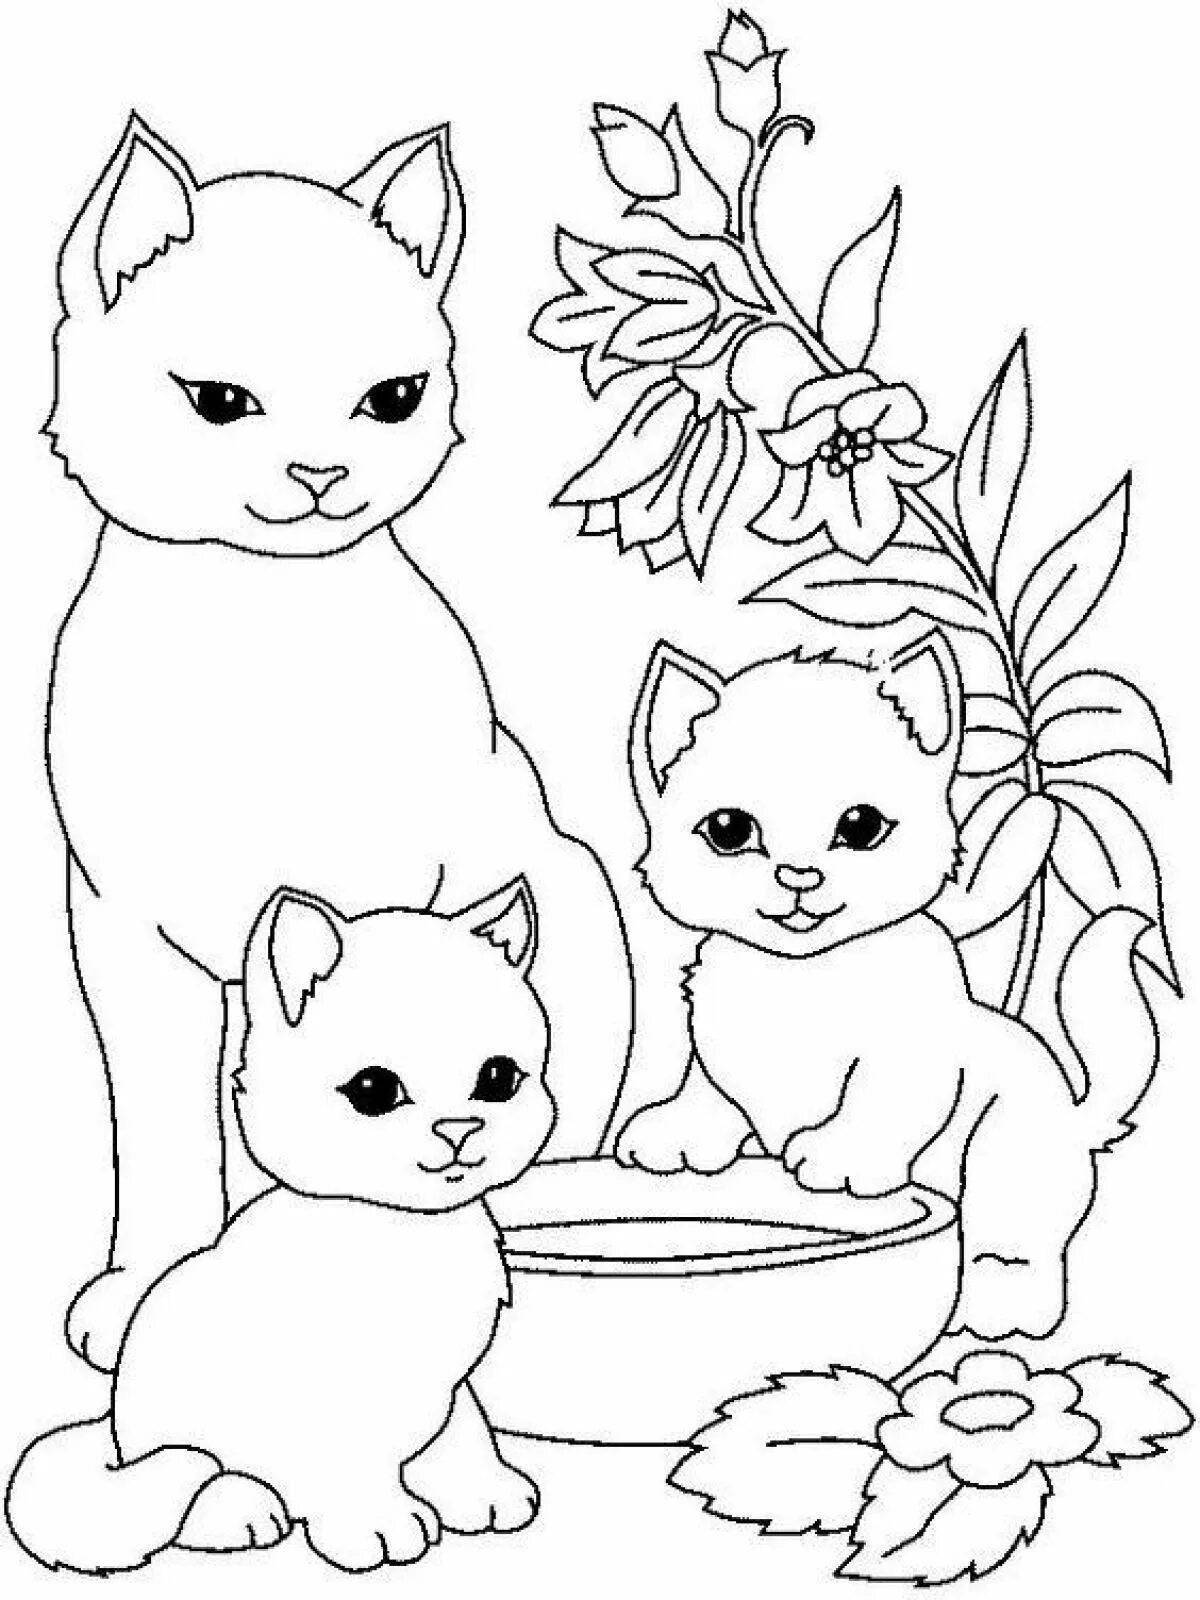 Coloring pages of cats